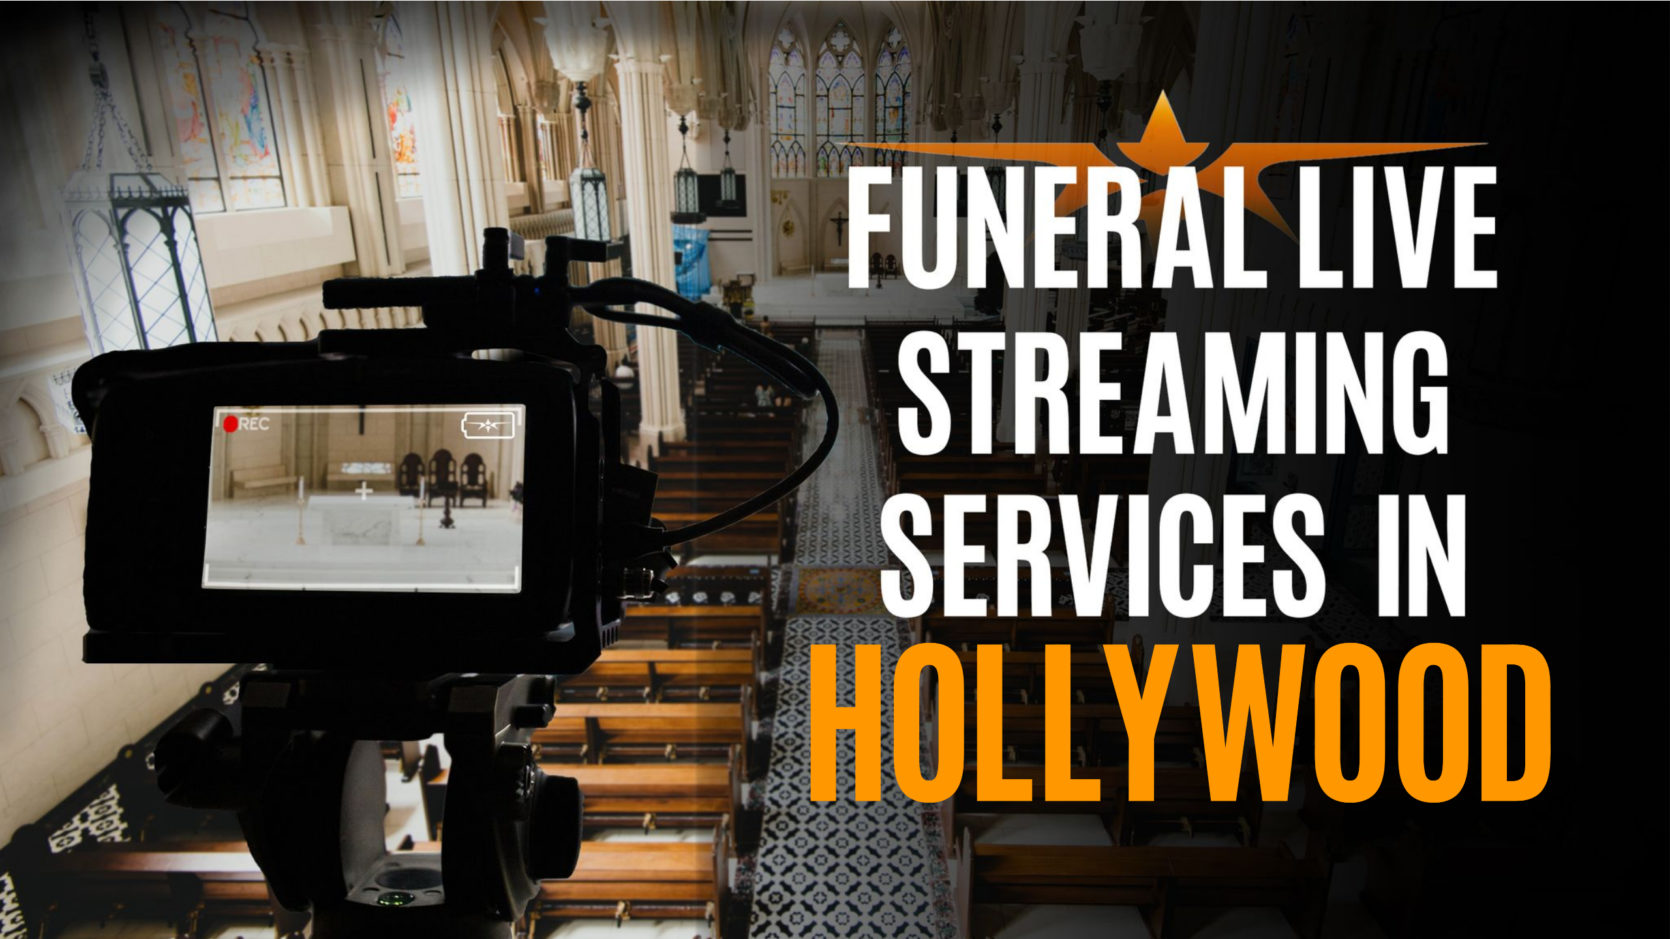 Funeral Live Streaming Services in Hollywood